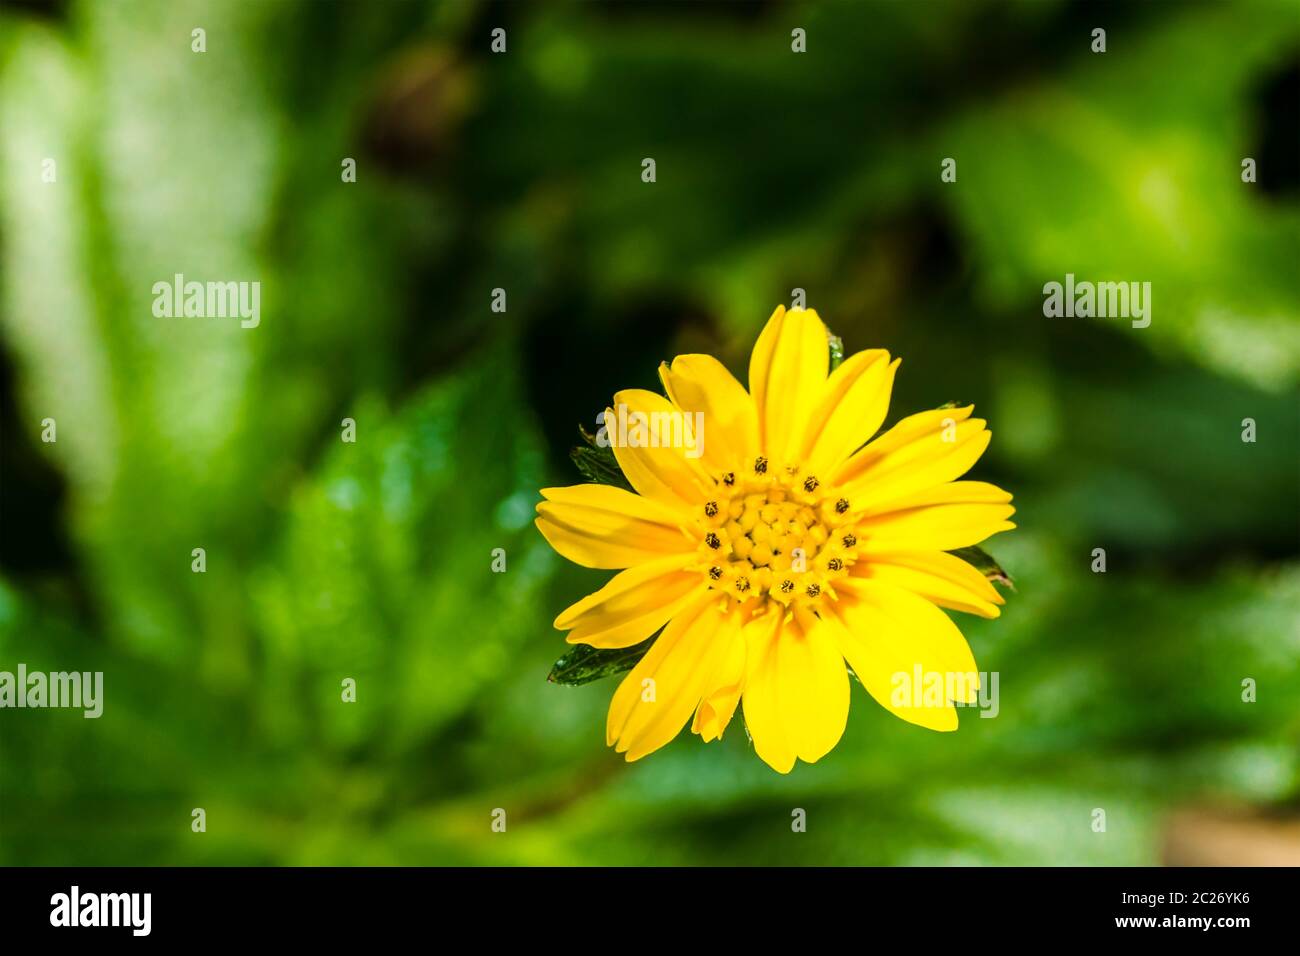 Beautiful Chinese Wedelia Flower. Wedelia is a flowering plant genus in the sunflower family Stock Photo